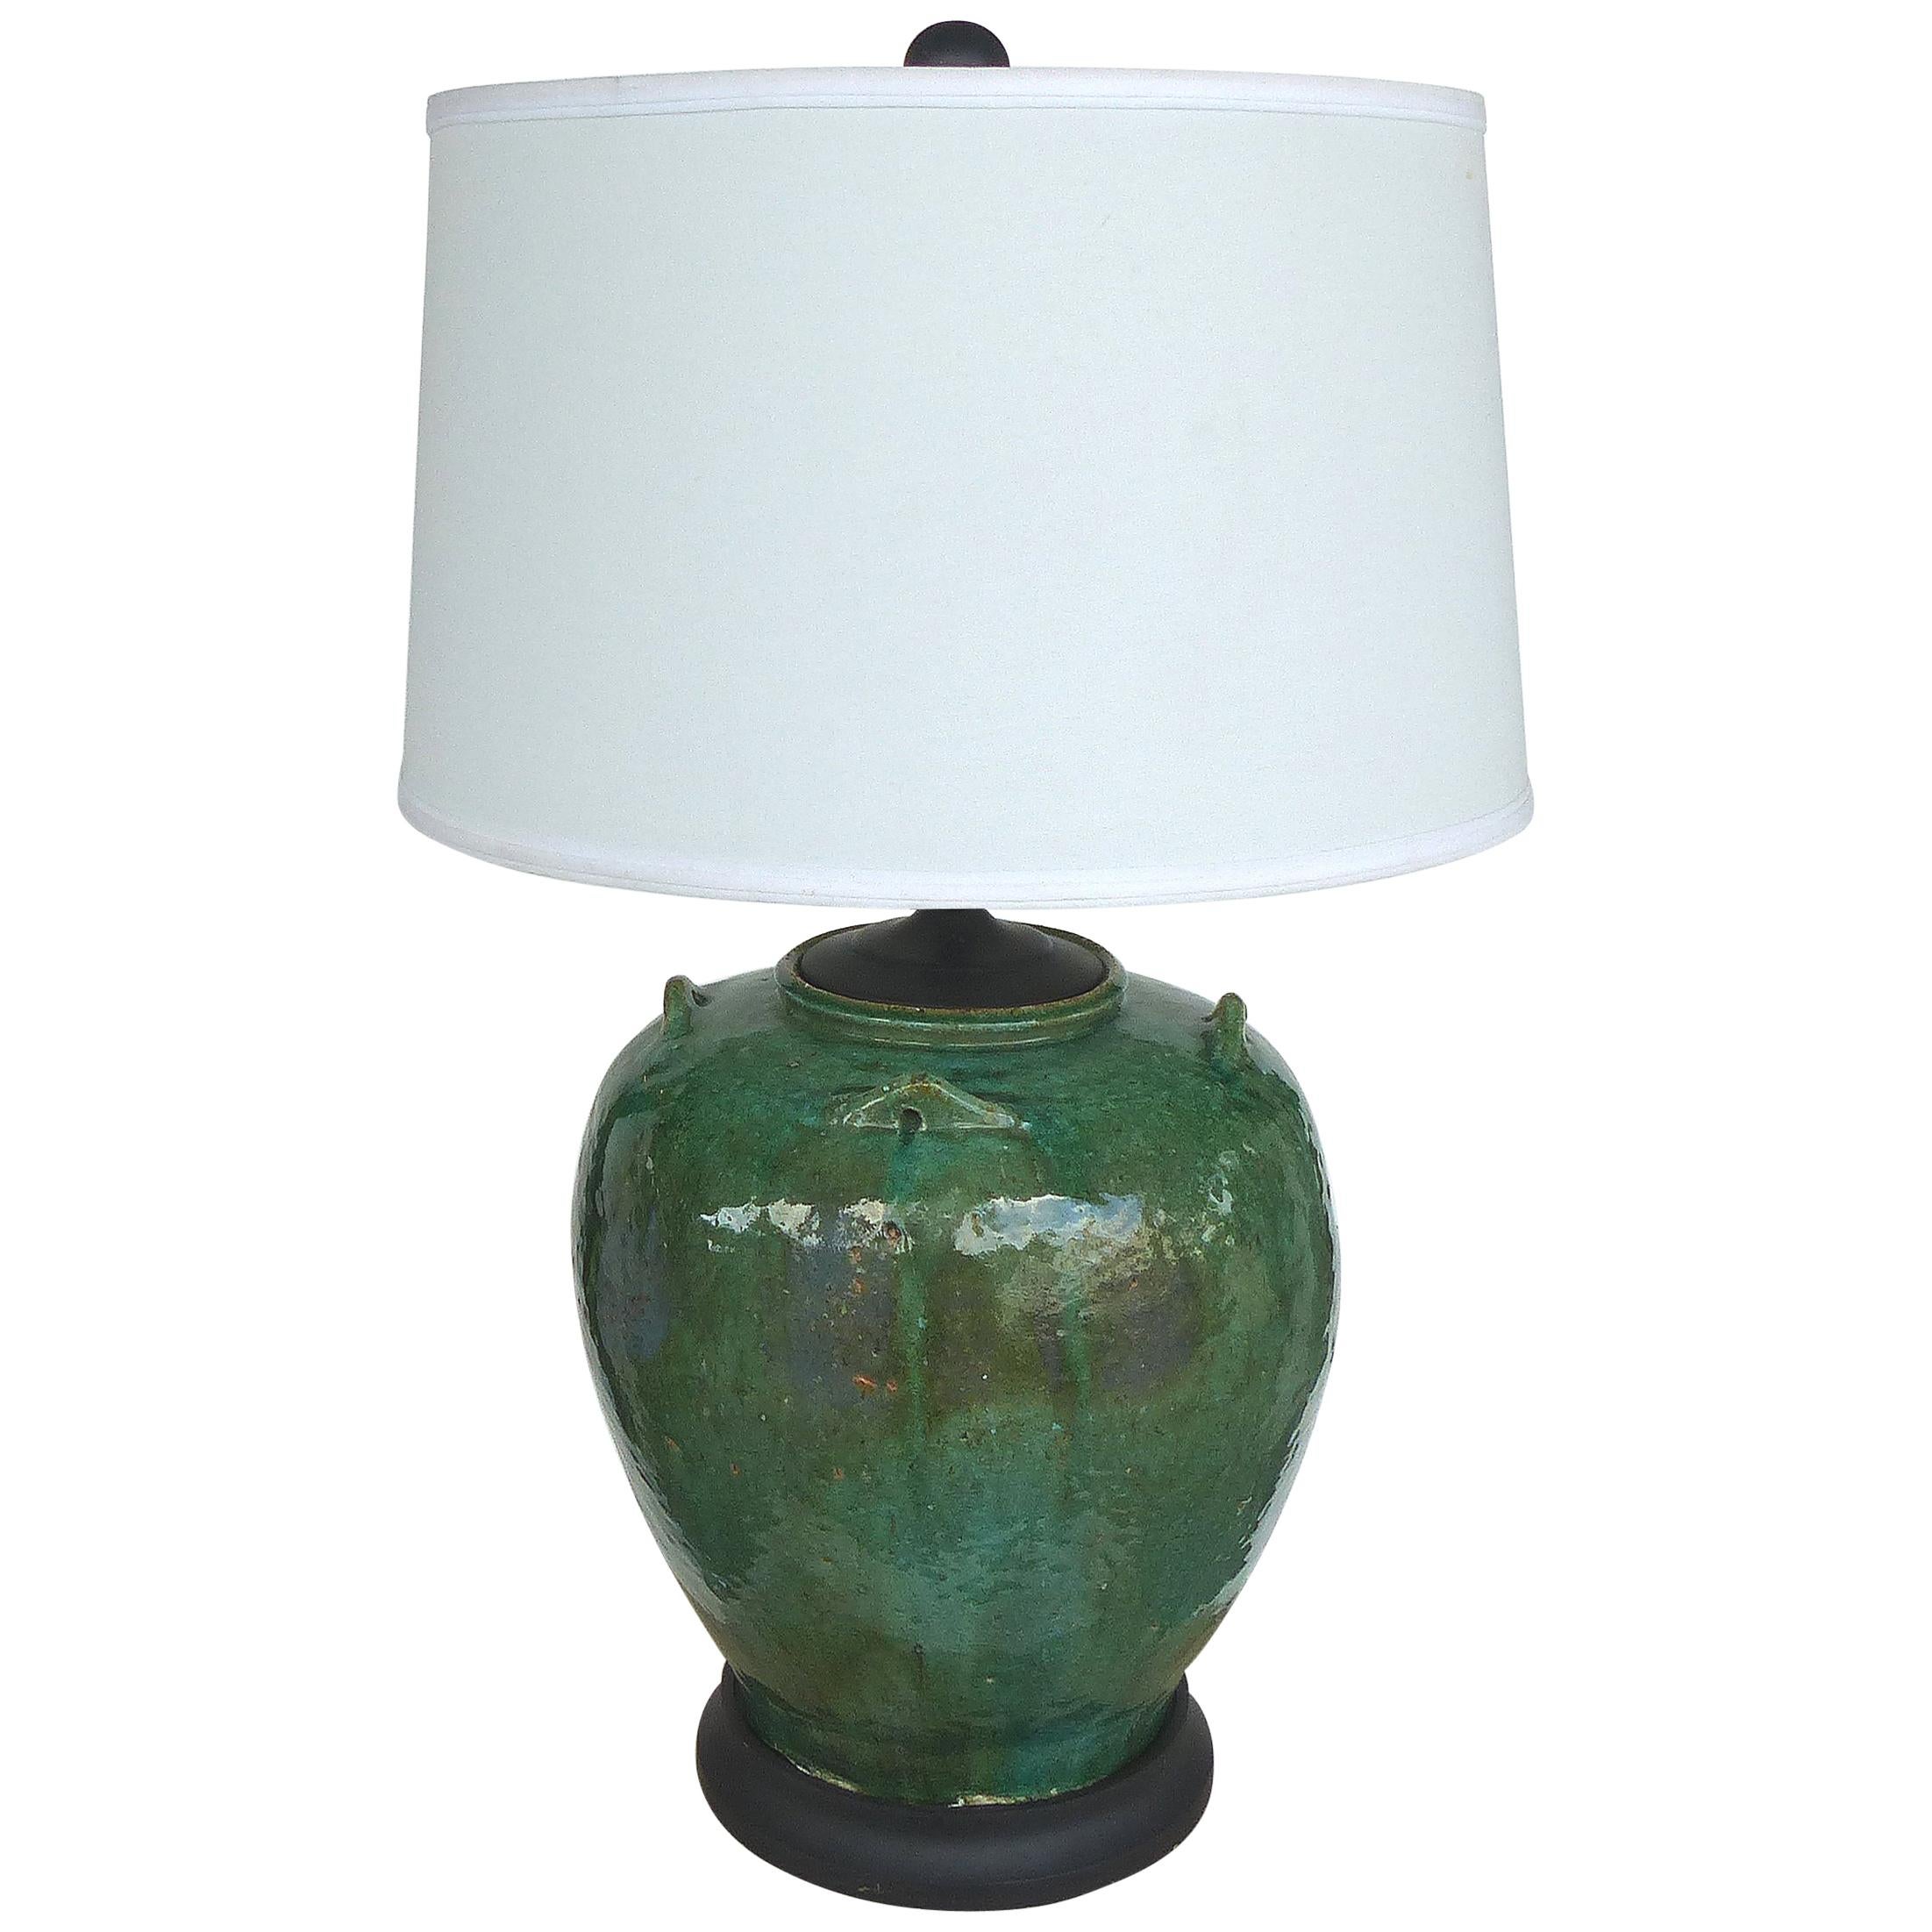 Large Green Glazed Terracotta Vessel Mounted as a Lamp